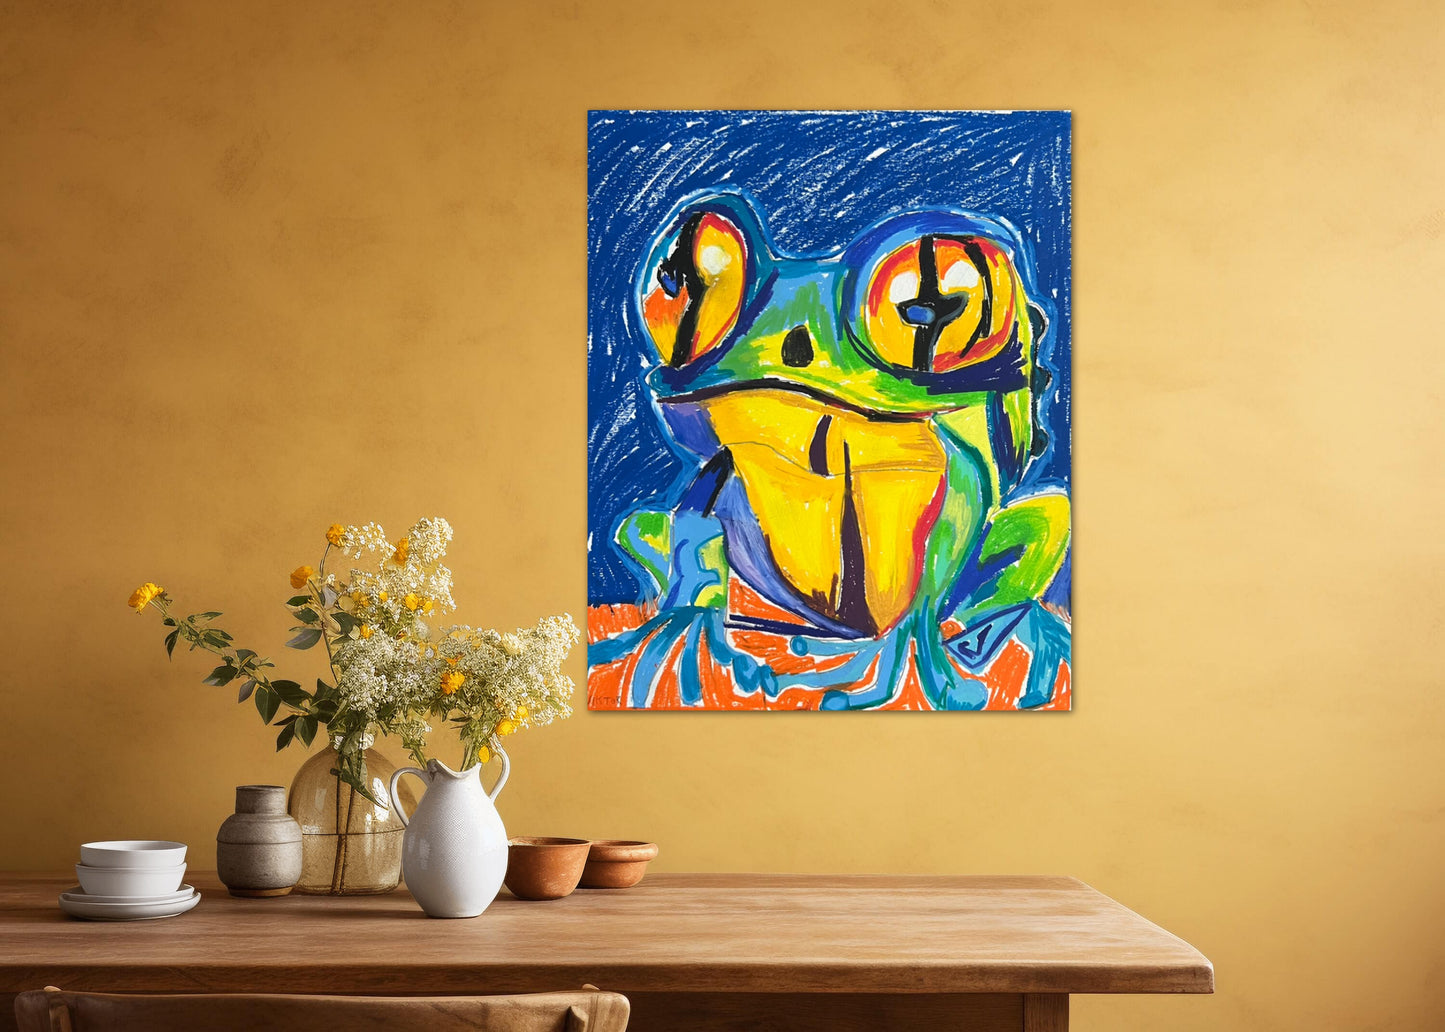 The Blue Frog - fine prints and canvas prints in more sizes